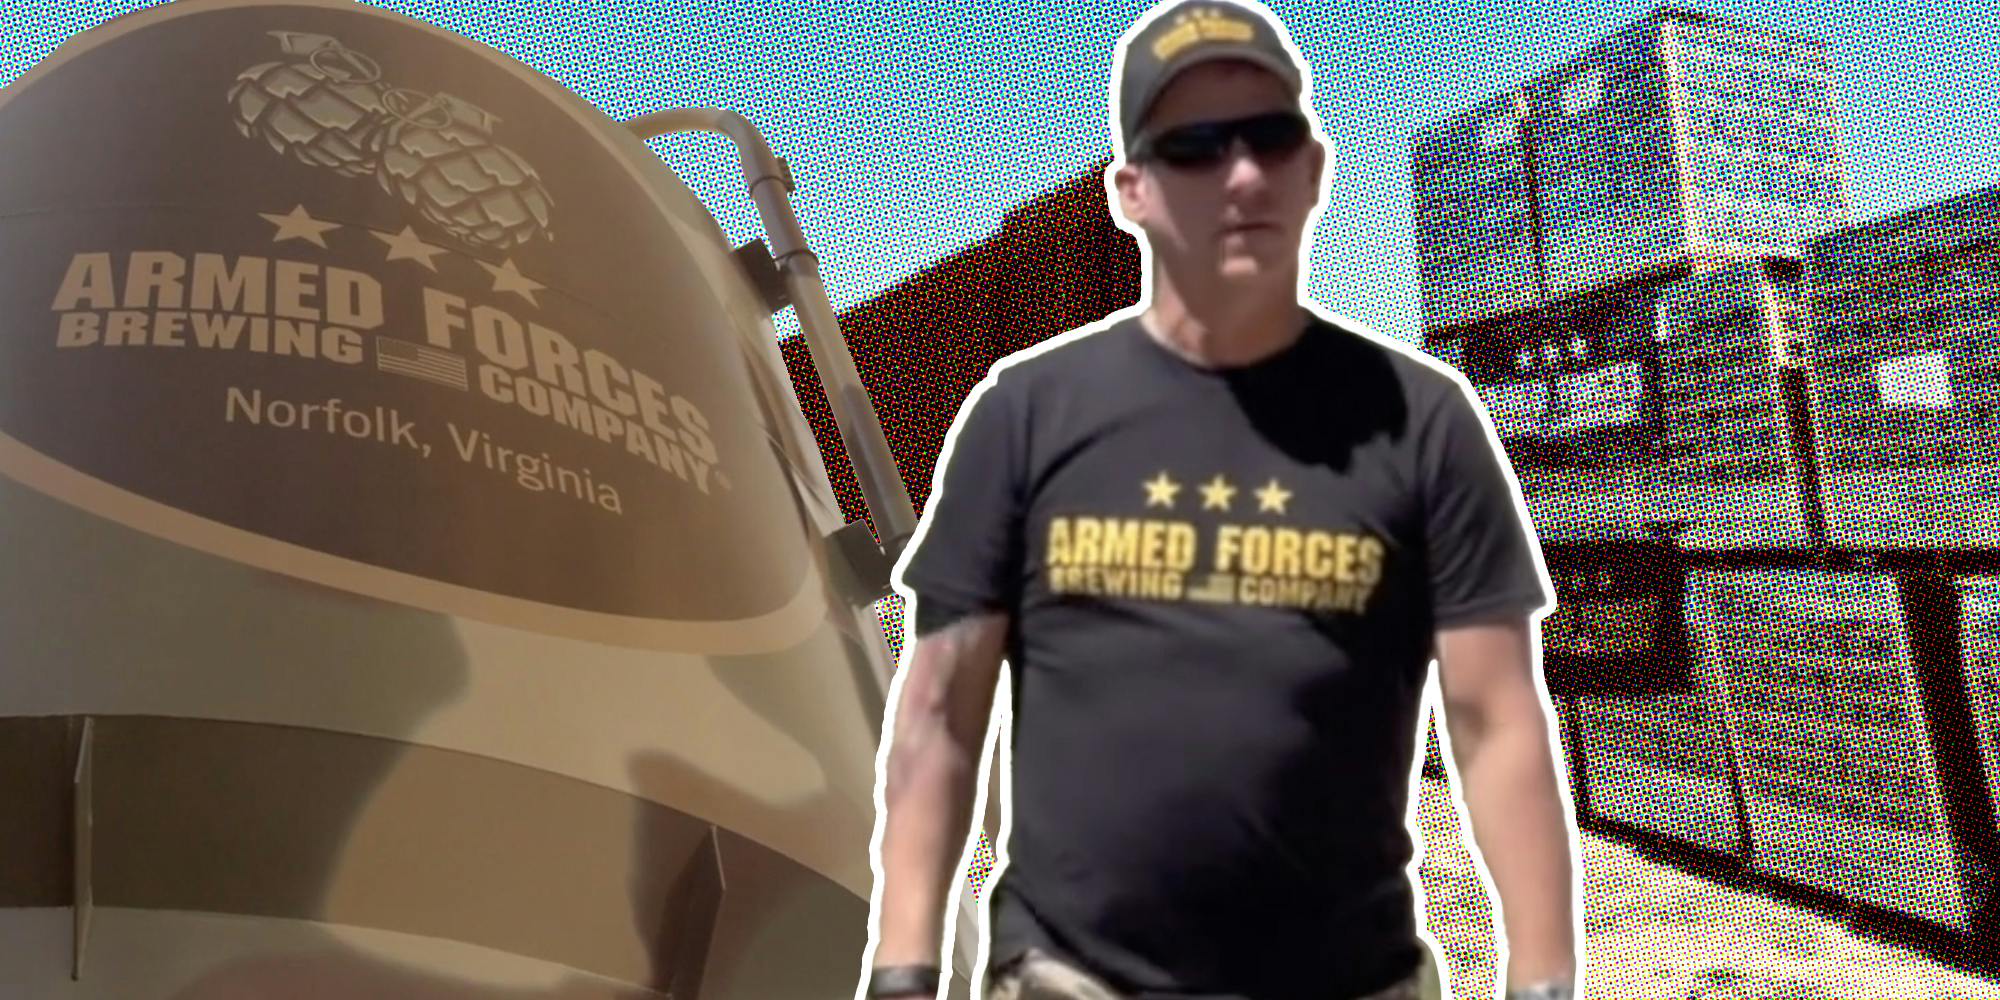 Armed Forces Brewing Builds U.S-Mexico Wall 48,000 Cans [Video]